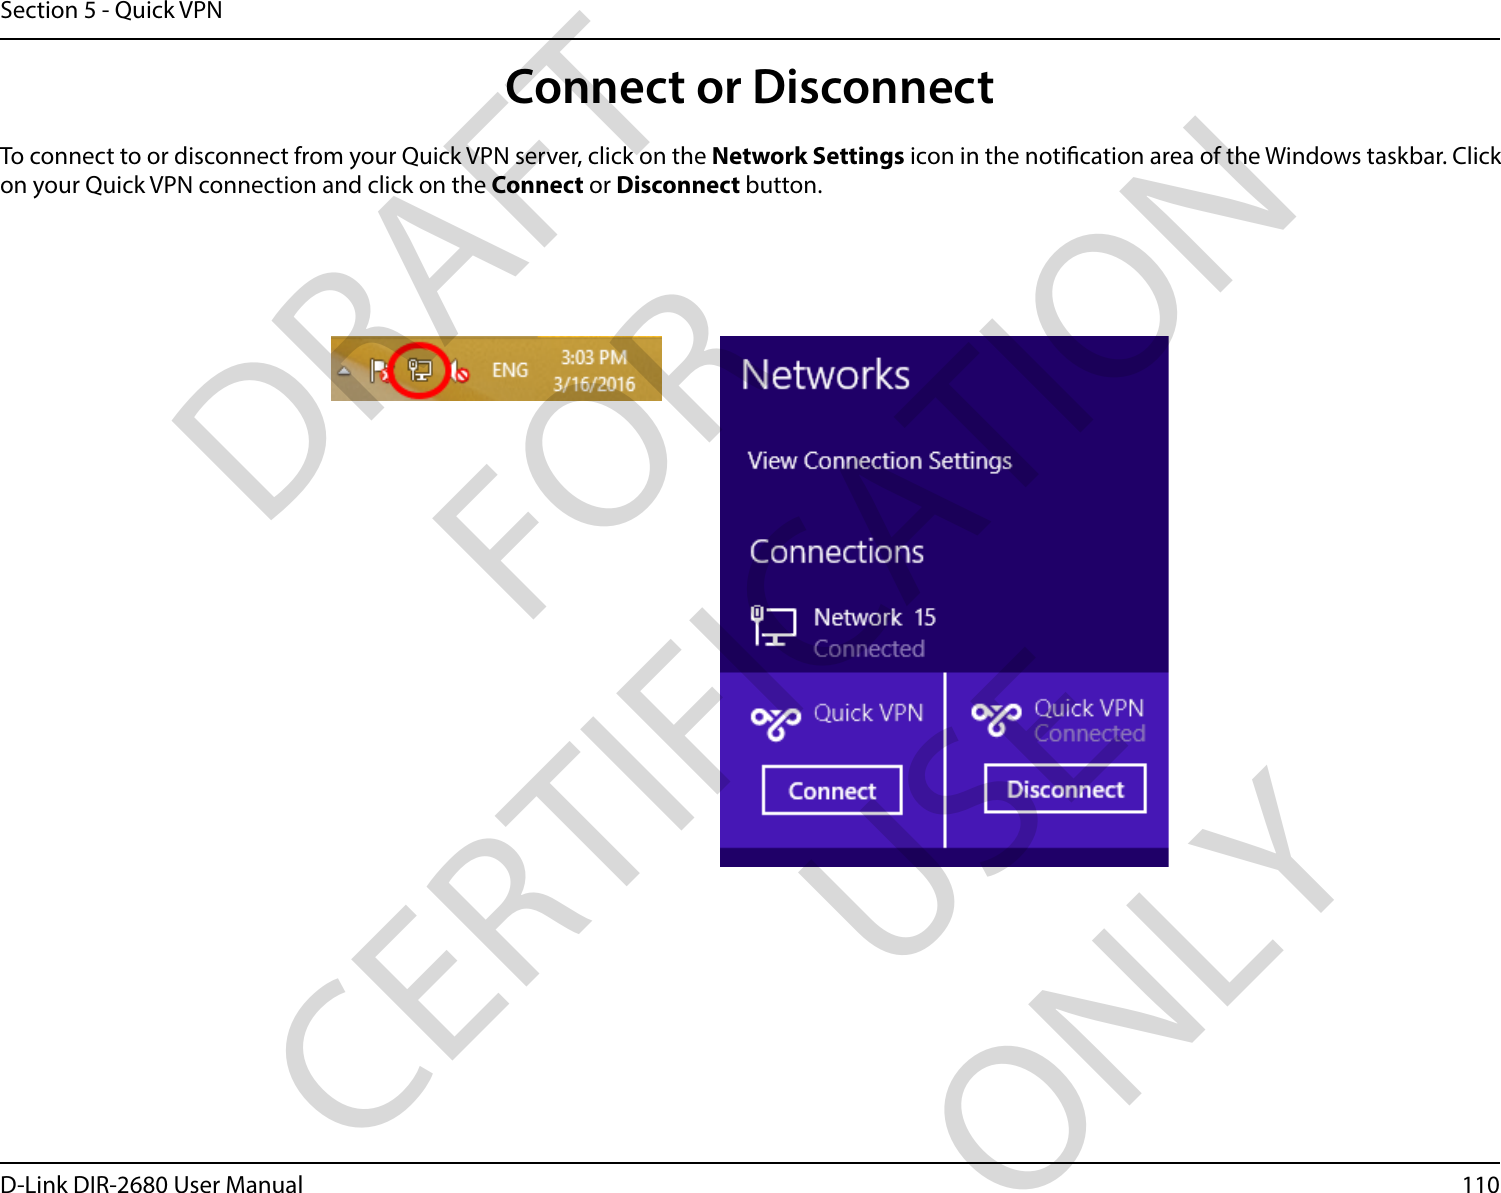 110D-Link DIR-2680 User ManualSection 5 - Quick VPNConnect or DisconnectTo connect to or disconnect from your Quick VPN server, click on the Network Settings icon in the notication area of the Windows taskbar. Click on your Quick VPN connection and click on the Connect or Disconnect button.DRAFT FOR CERTIFICATION USE ONLY